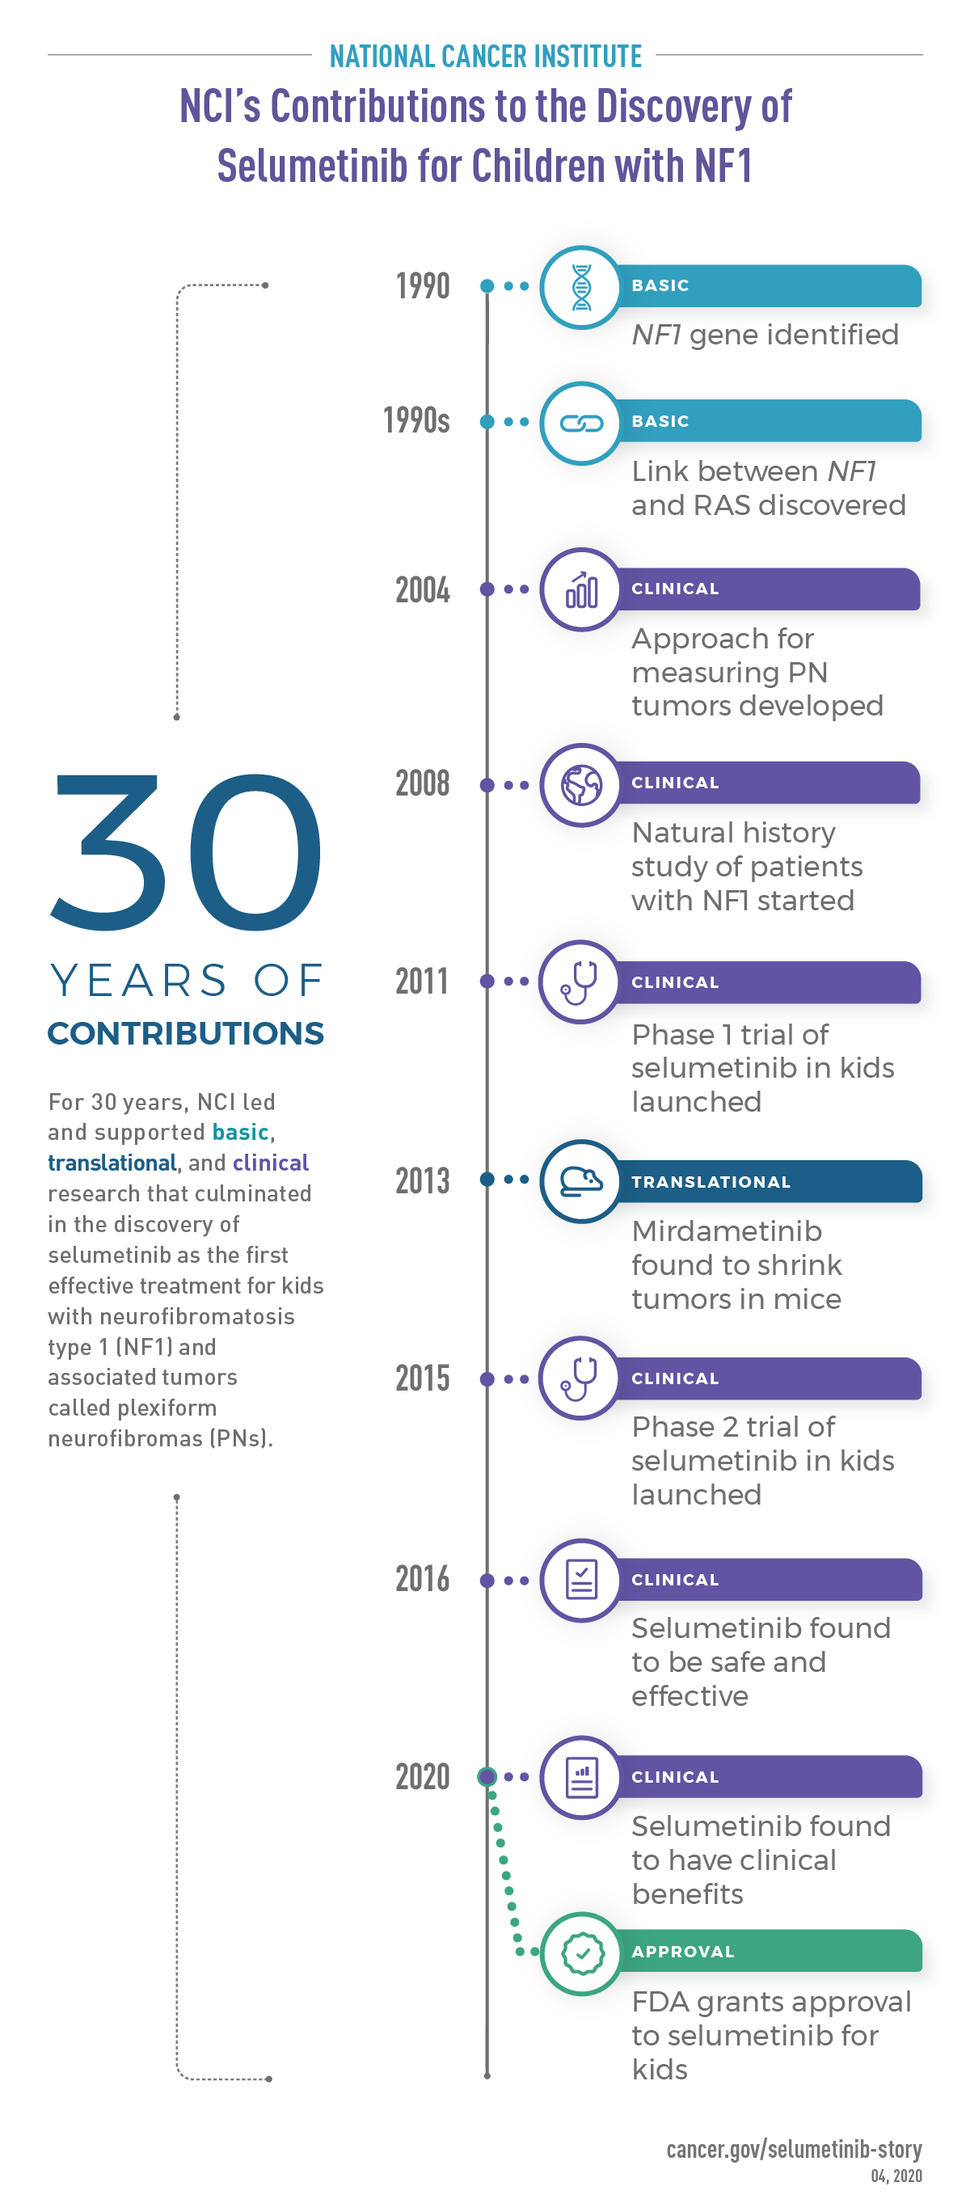 NCI’s Contributions to the Discovery of Selumetinib for Children with NF1. For 30 years, NCI led and supported basic, translational, and clinical research that culminated in the discovery of selumetinib as the first effective treatment for kids with neurofibromatosis type 1 (NF1) and associated tumors called plexiform neurofibromas (PNs). It started in 1990 with NF1 gene identified and ending in 2020 with FDA granting approval to selumetinib for kids.